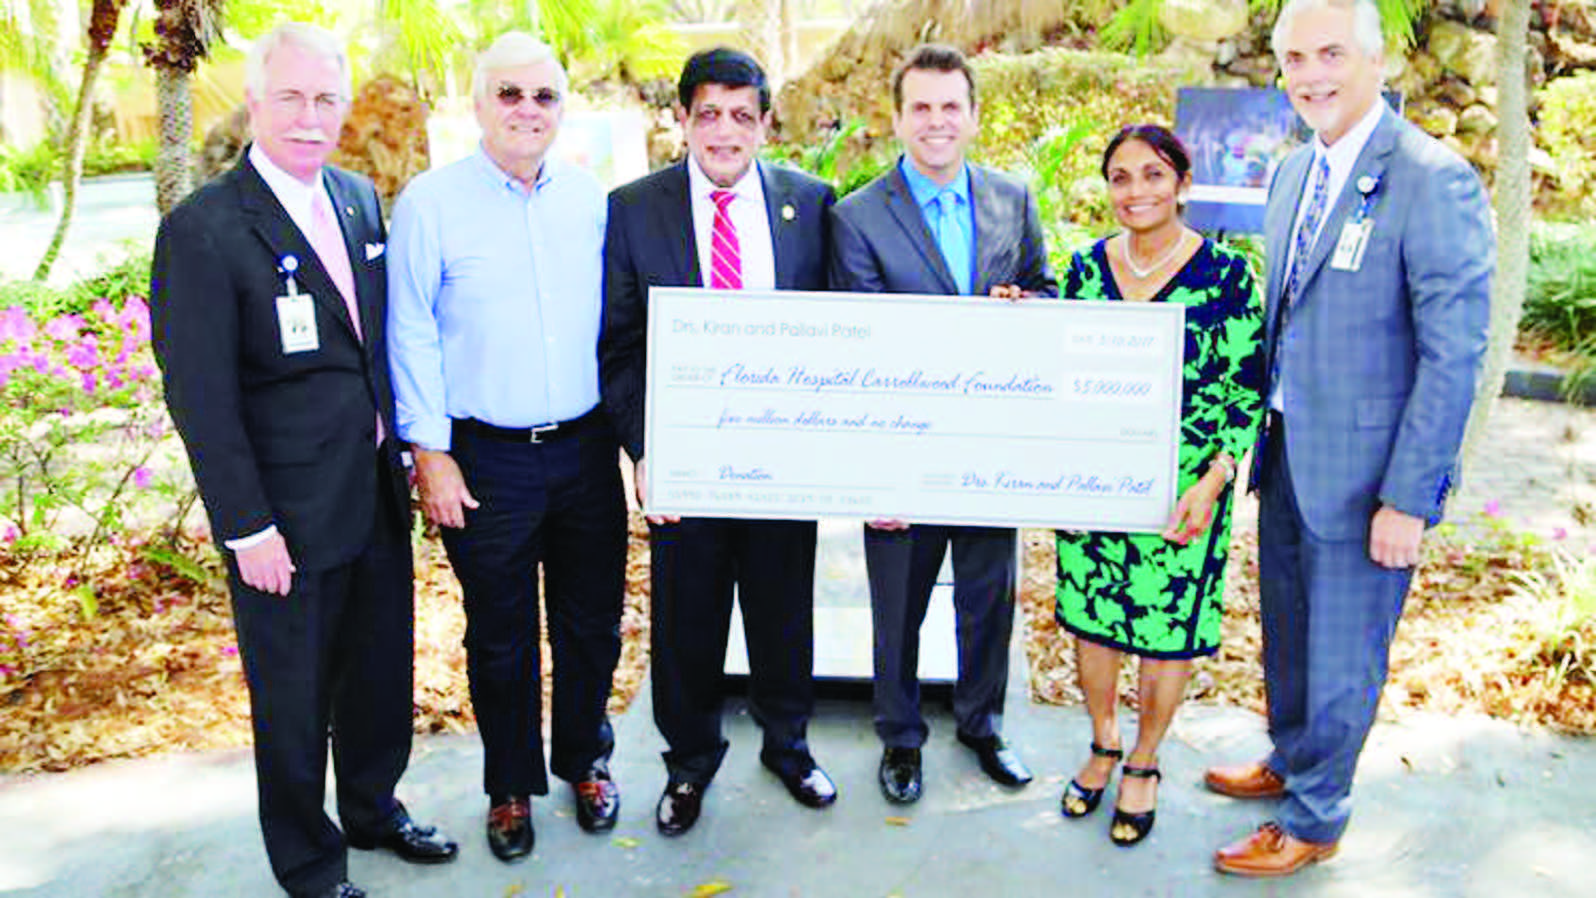 Dr. Kiran Patel and wife Dr. Pallavi Patel present a donation of $5 million to Florida Hospital Carrollwood